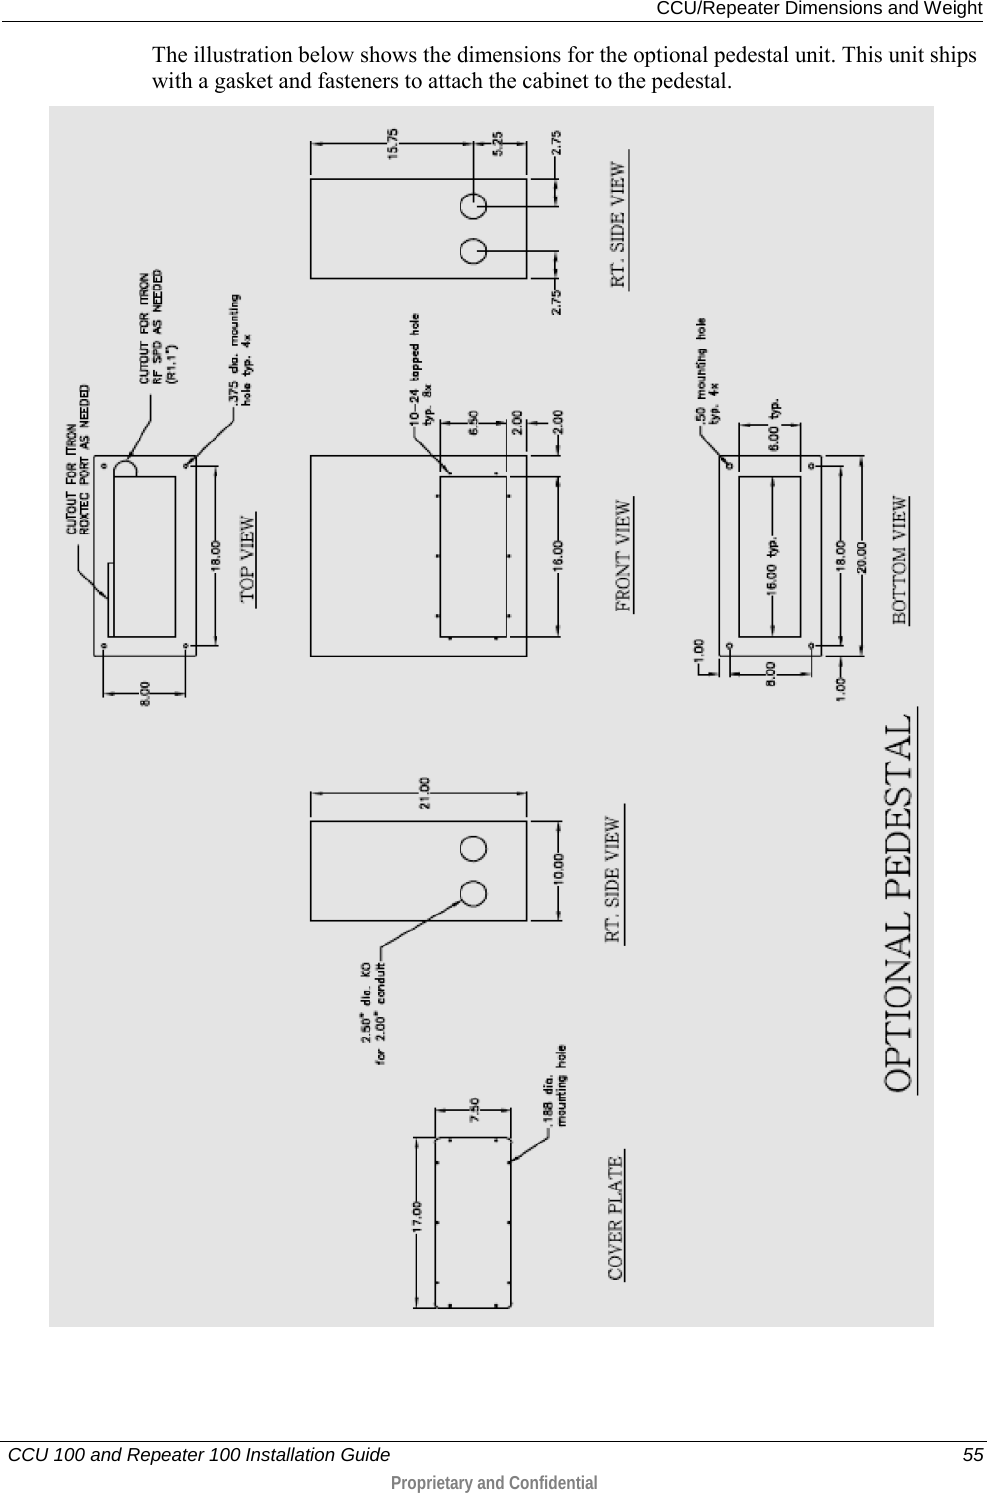  CCU/Repeater Dimensions and Weight   CCU 100 and Repeater 100 Installation Guide    55  Proprietary and Confidential  The illustration below shows the dimensions for the optional pedestal unit. This unit ships with a gasket and fasteners to attach the cabinet to the pedestal.   